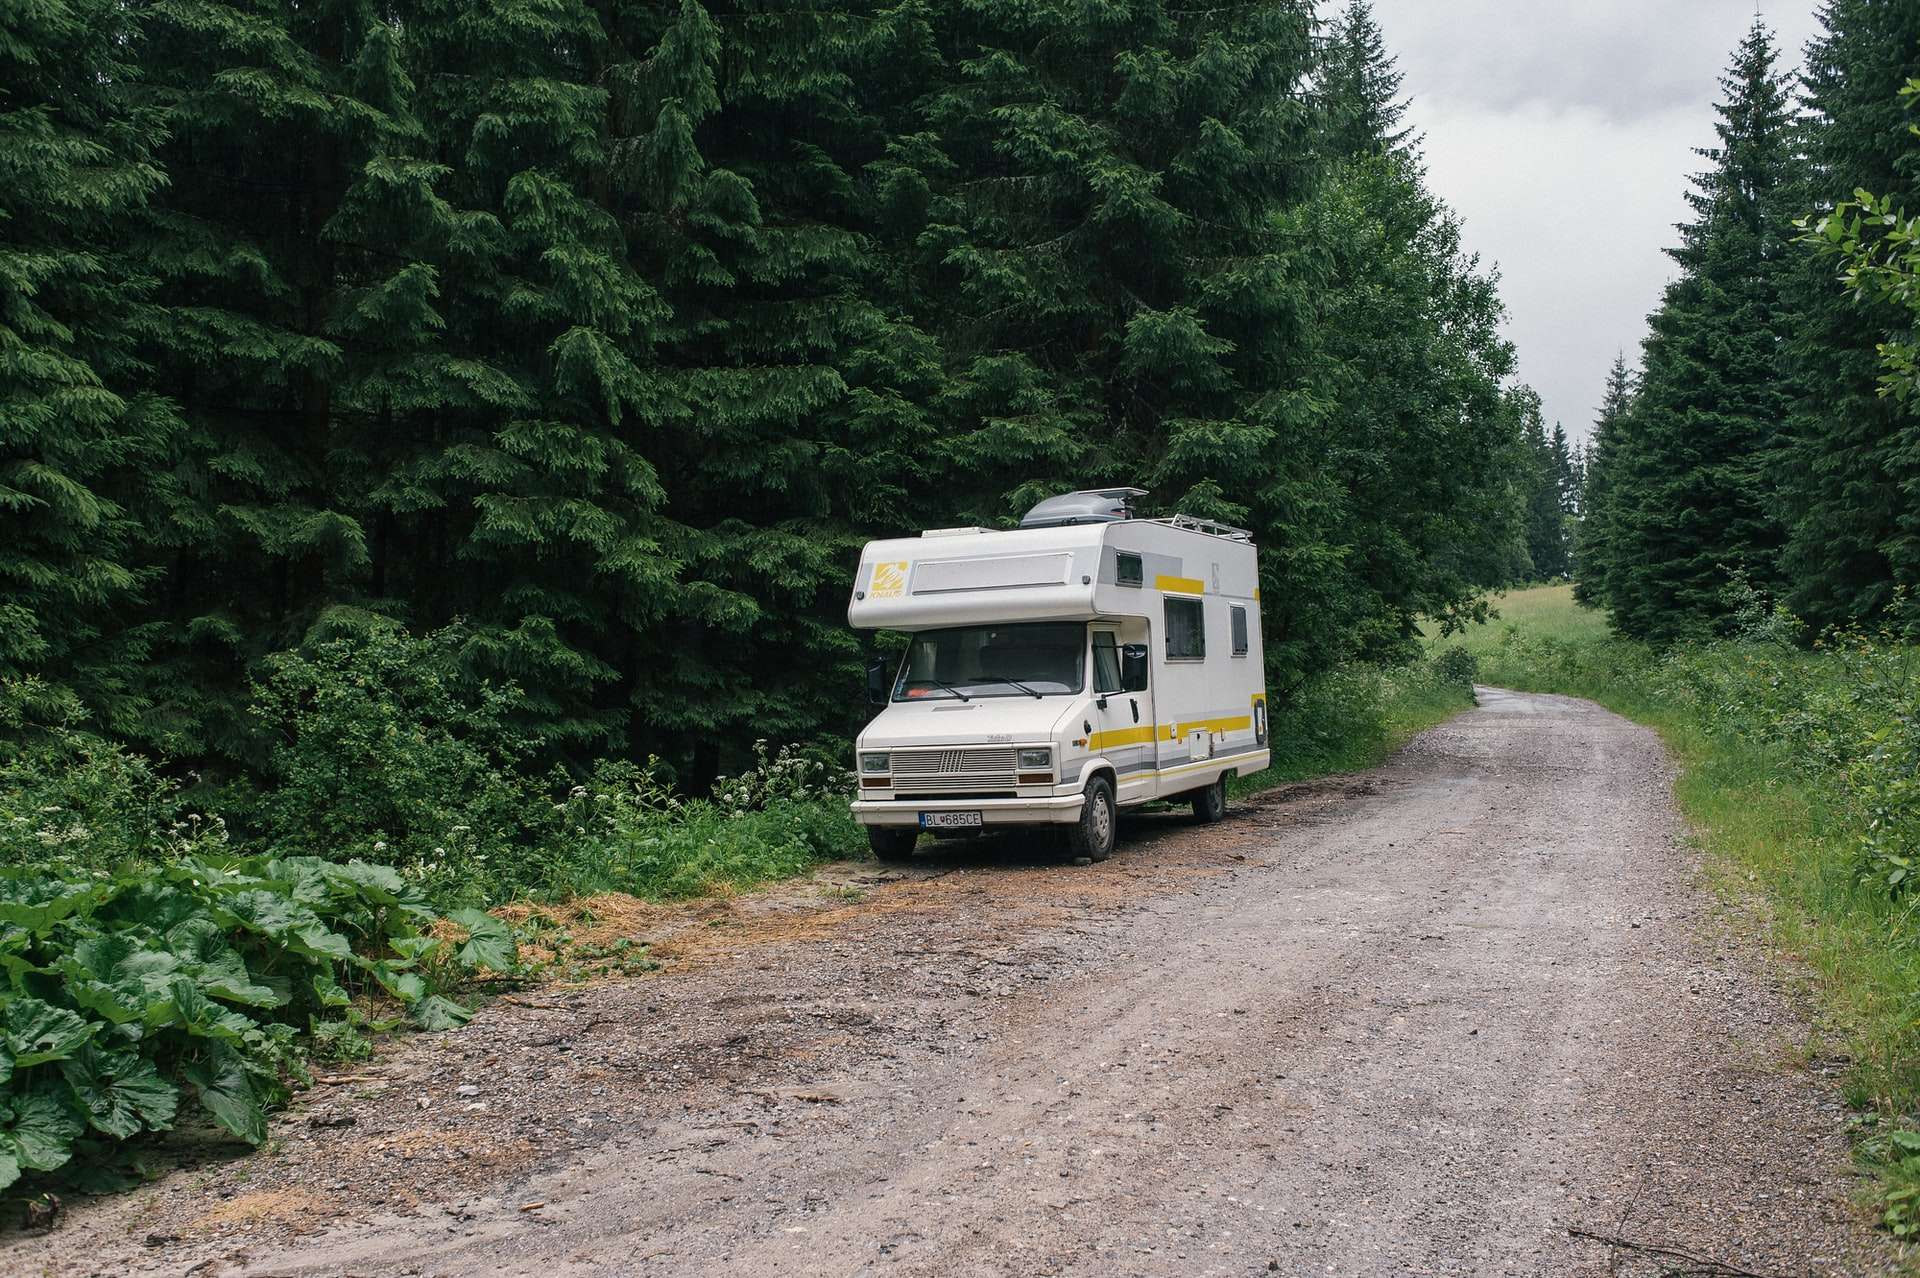 Review: Duluth, Minnesotaâs 3 RV Campgrounds